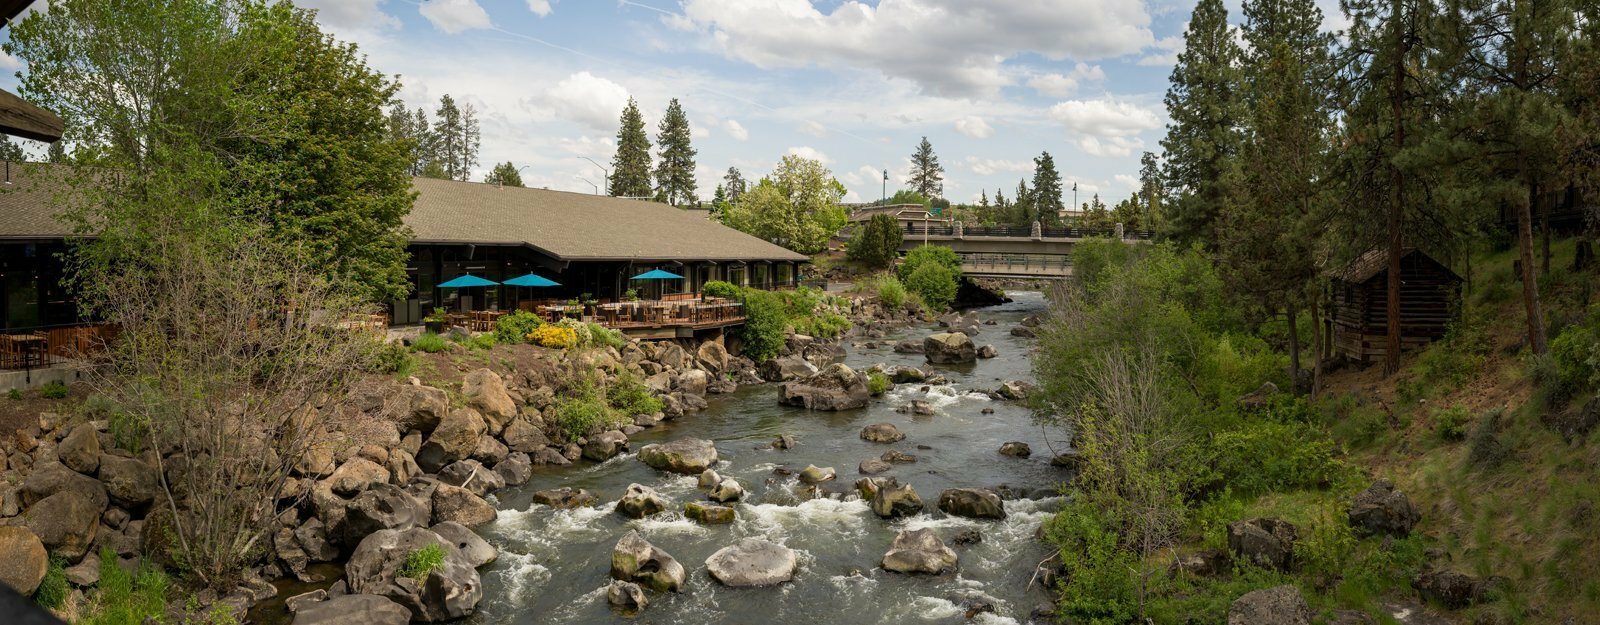 Photo of Riverhouse on the Deschutes, Bend, OR